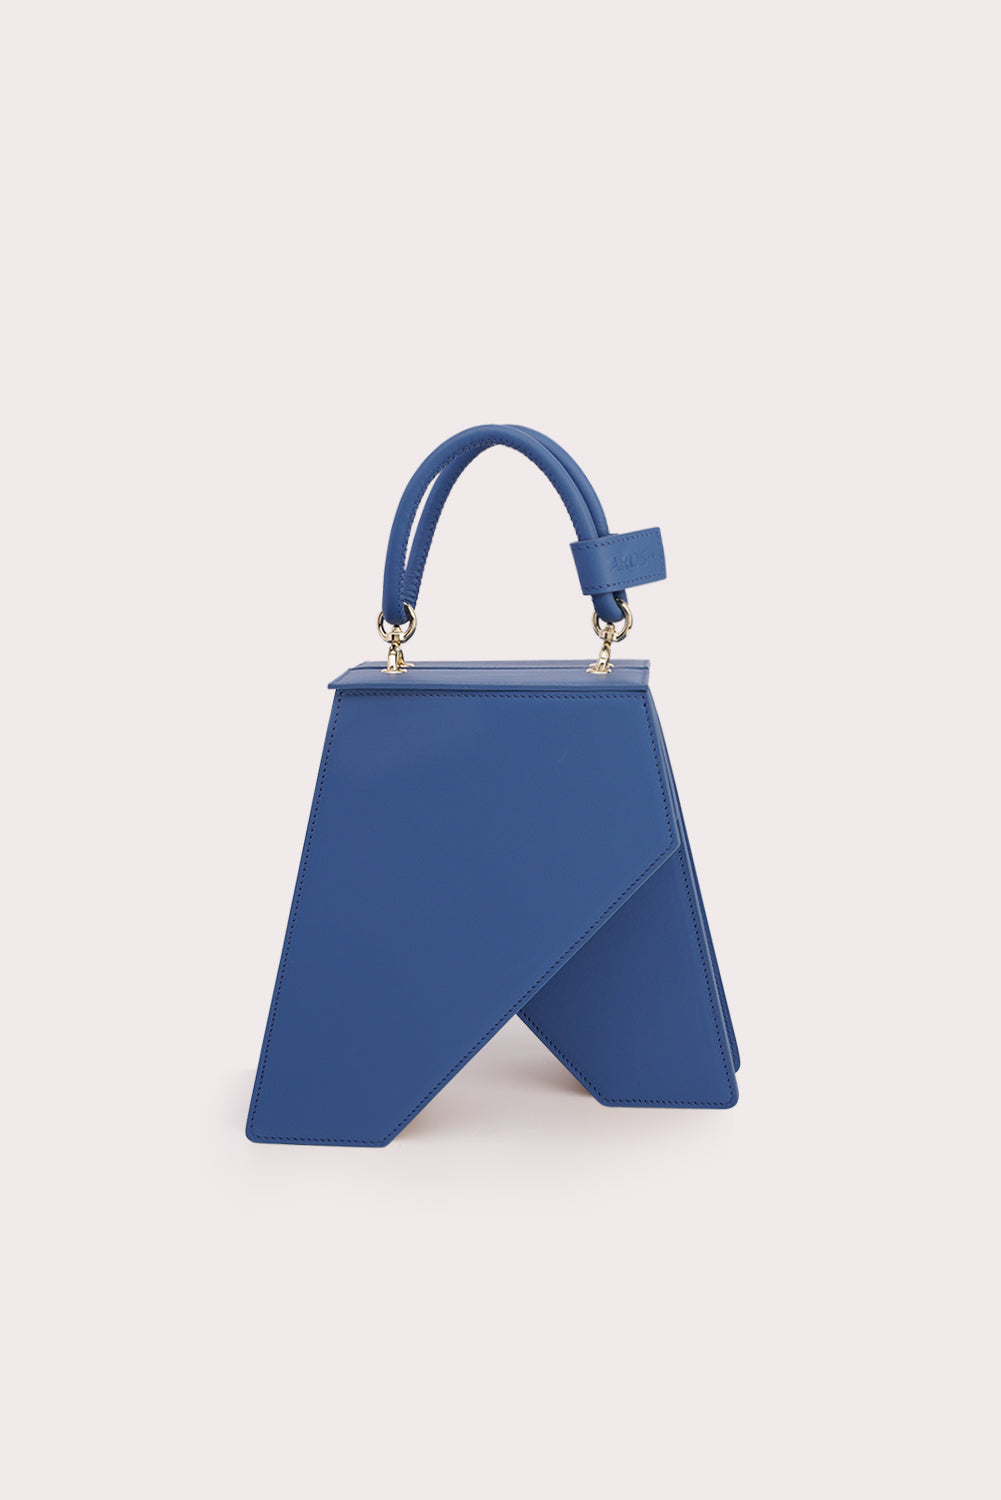 Trapezoid Tapo Bag in River Blue